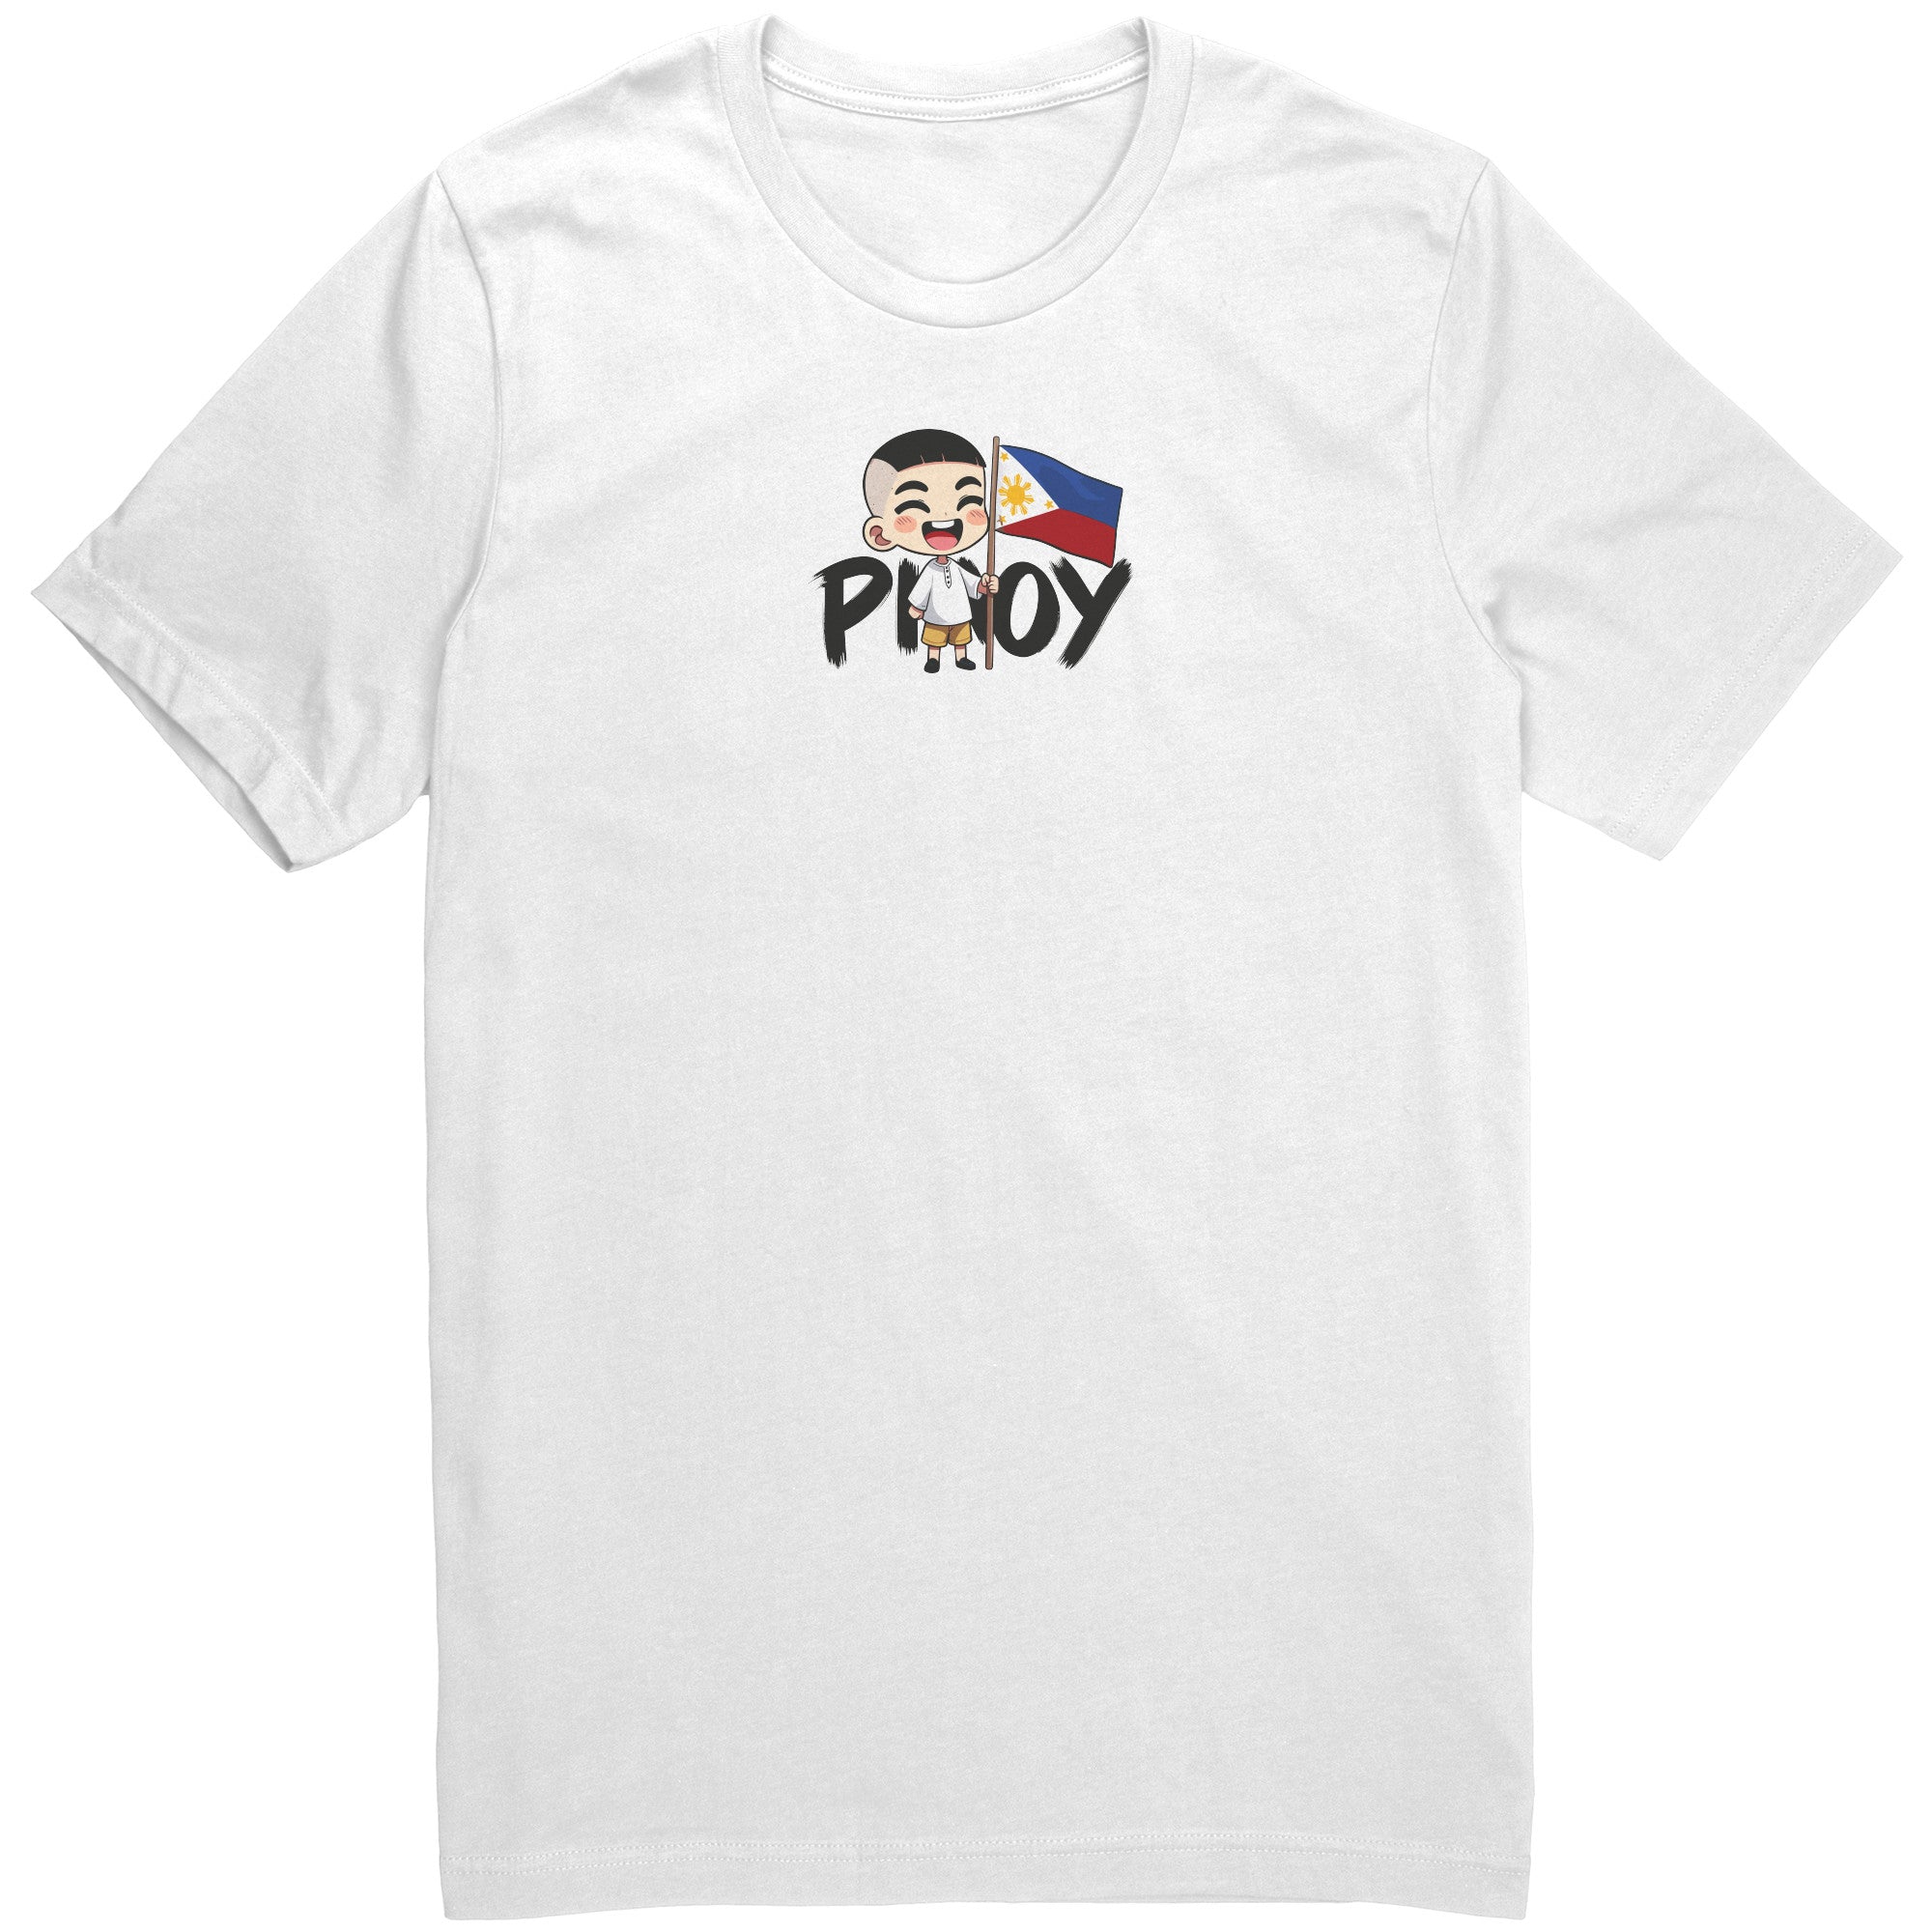 "Cute Cartoon Filipino Pride T-shirt - Vibrant Pinoy Pride Tee - Perfect Gift for Filipinos - Colorful Philippines Heritage Tee" - R